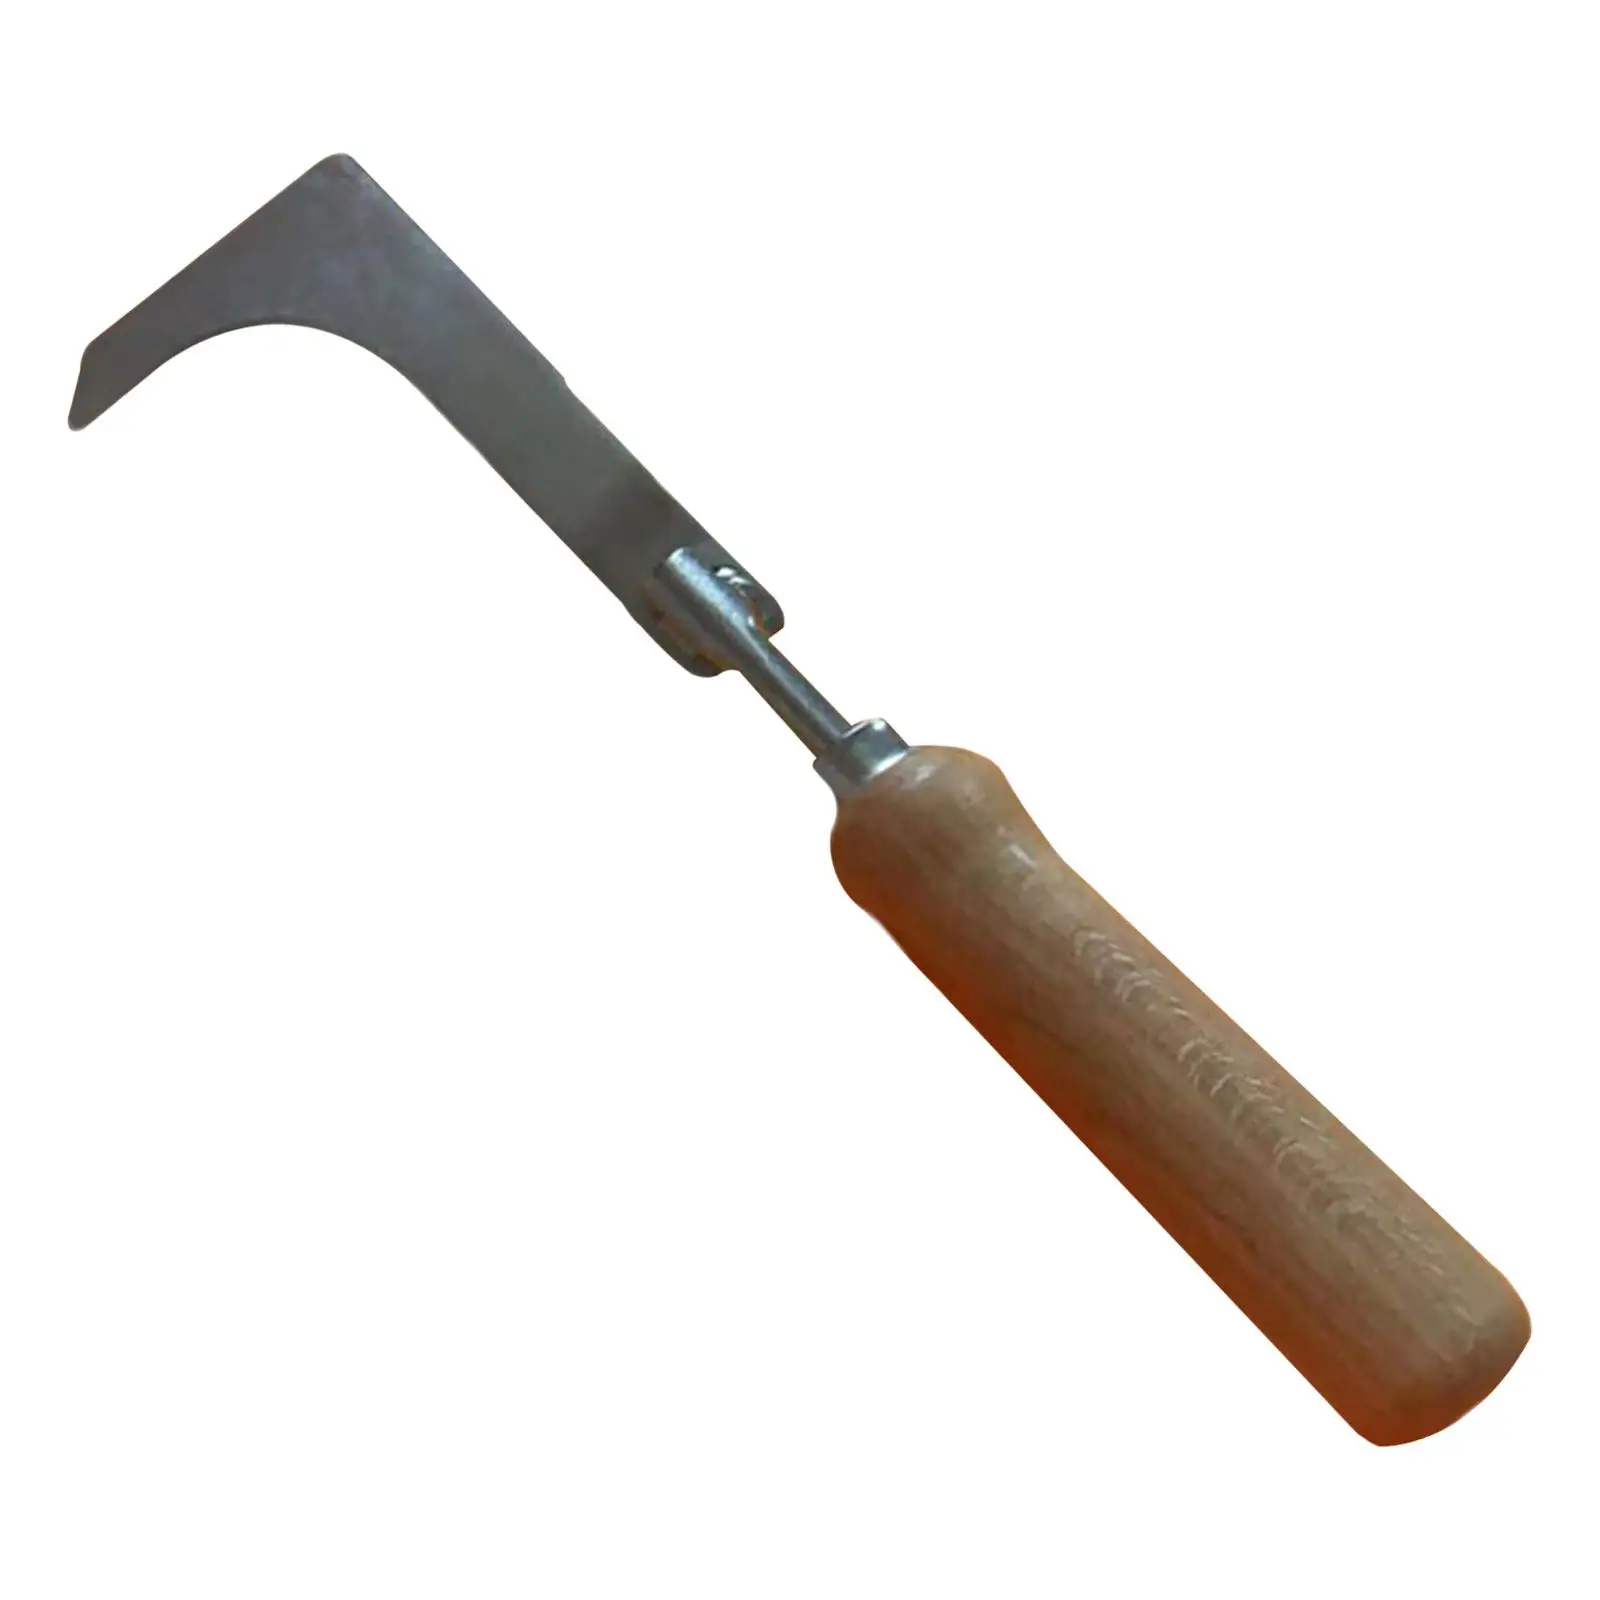 Crack Weeder Stainless L Shaped Blade Wooden Handle Side Walk Weeding Tool for Farm Gardening Lawn Yard Terrace Paving